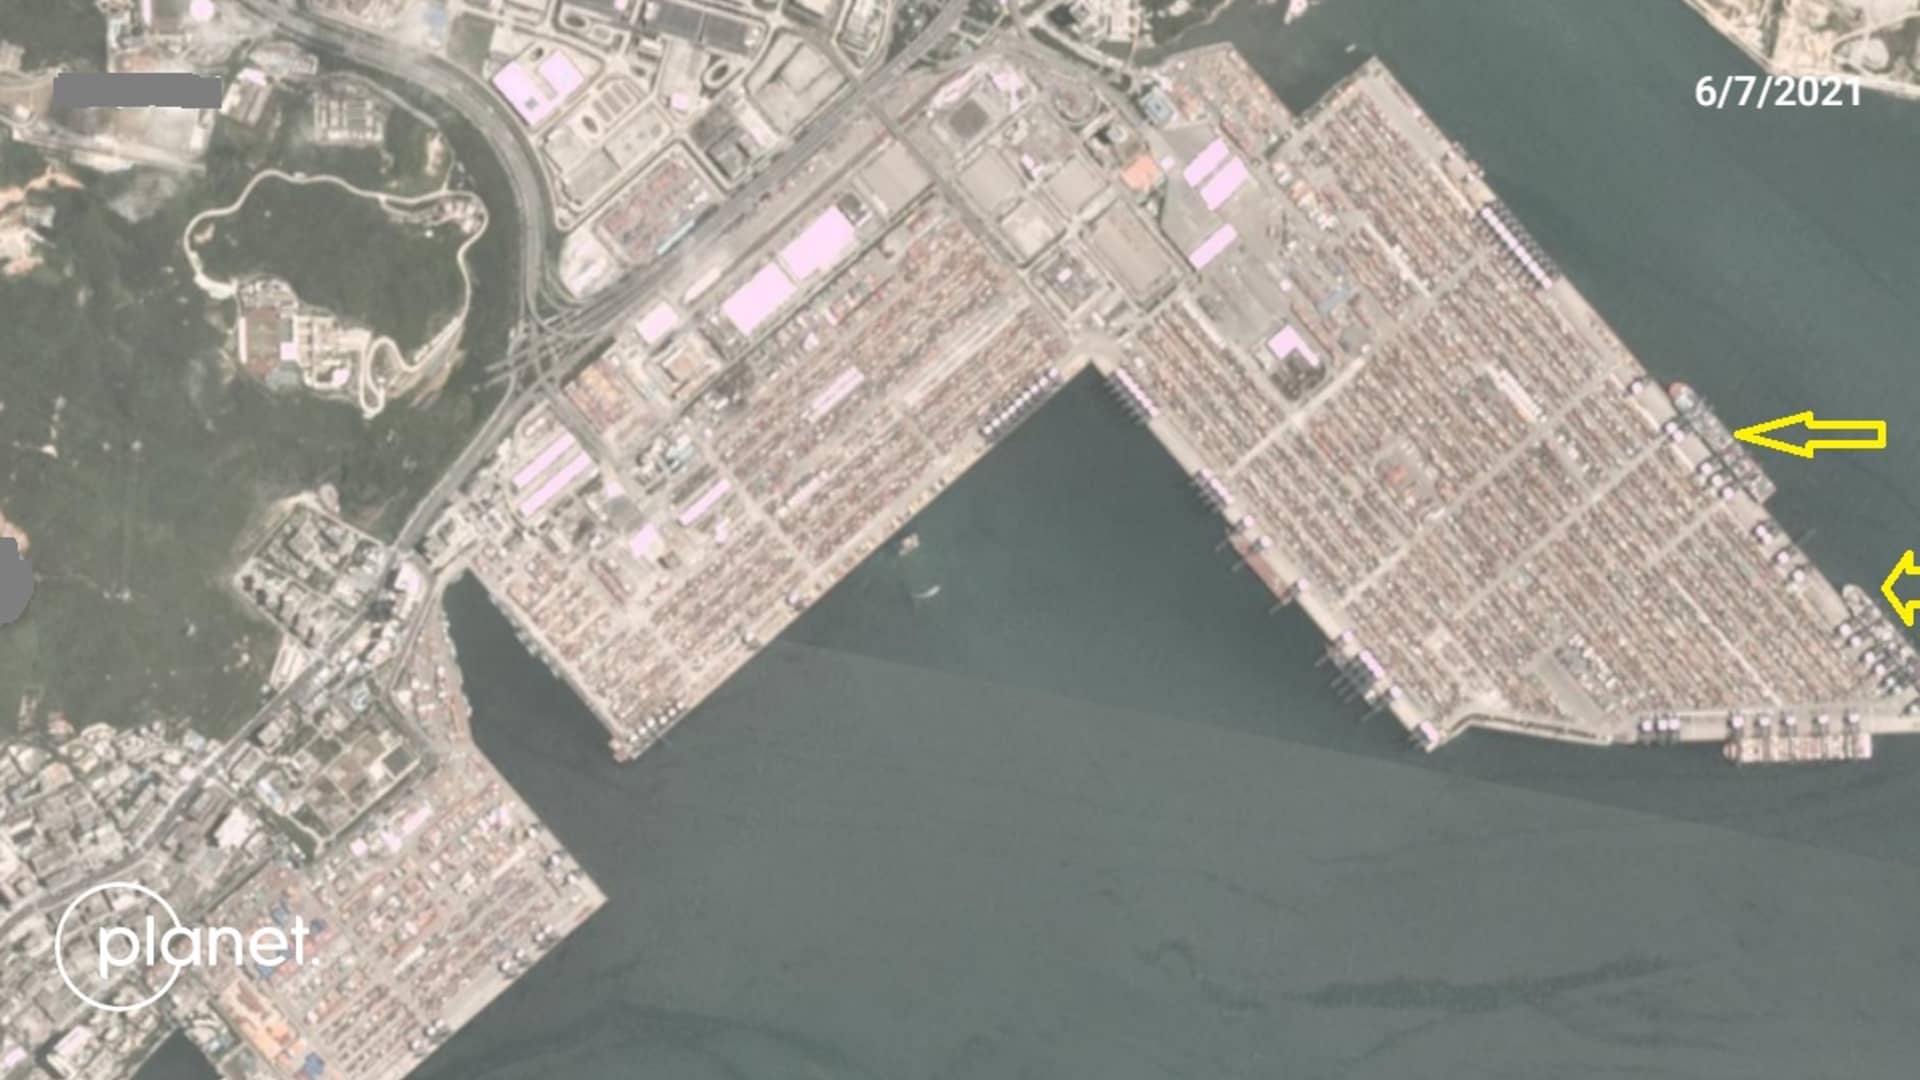 Port of Yantian on June 8, 2021. Arrows point to vessels at berth. The photo shows containers piling up at the port but few ships to export the goods after port officials temporarily shut down operations to contain a Covid outbreak in late May.